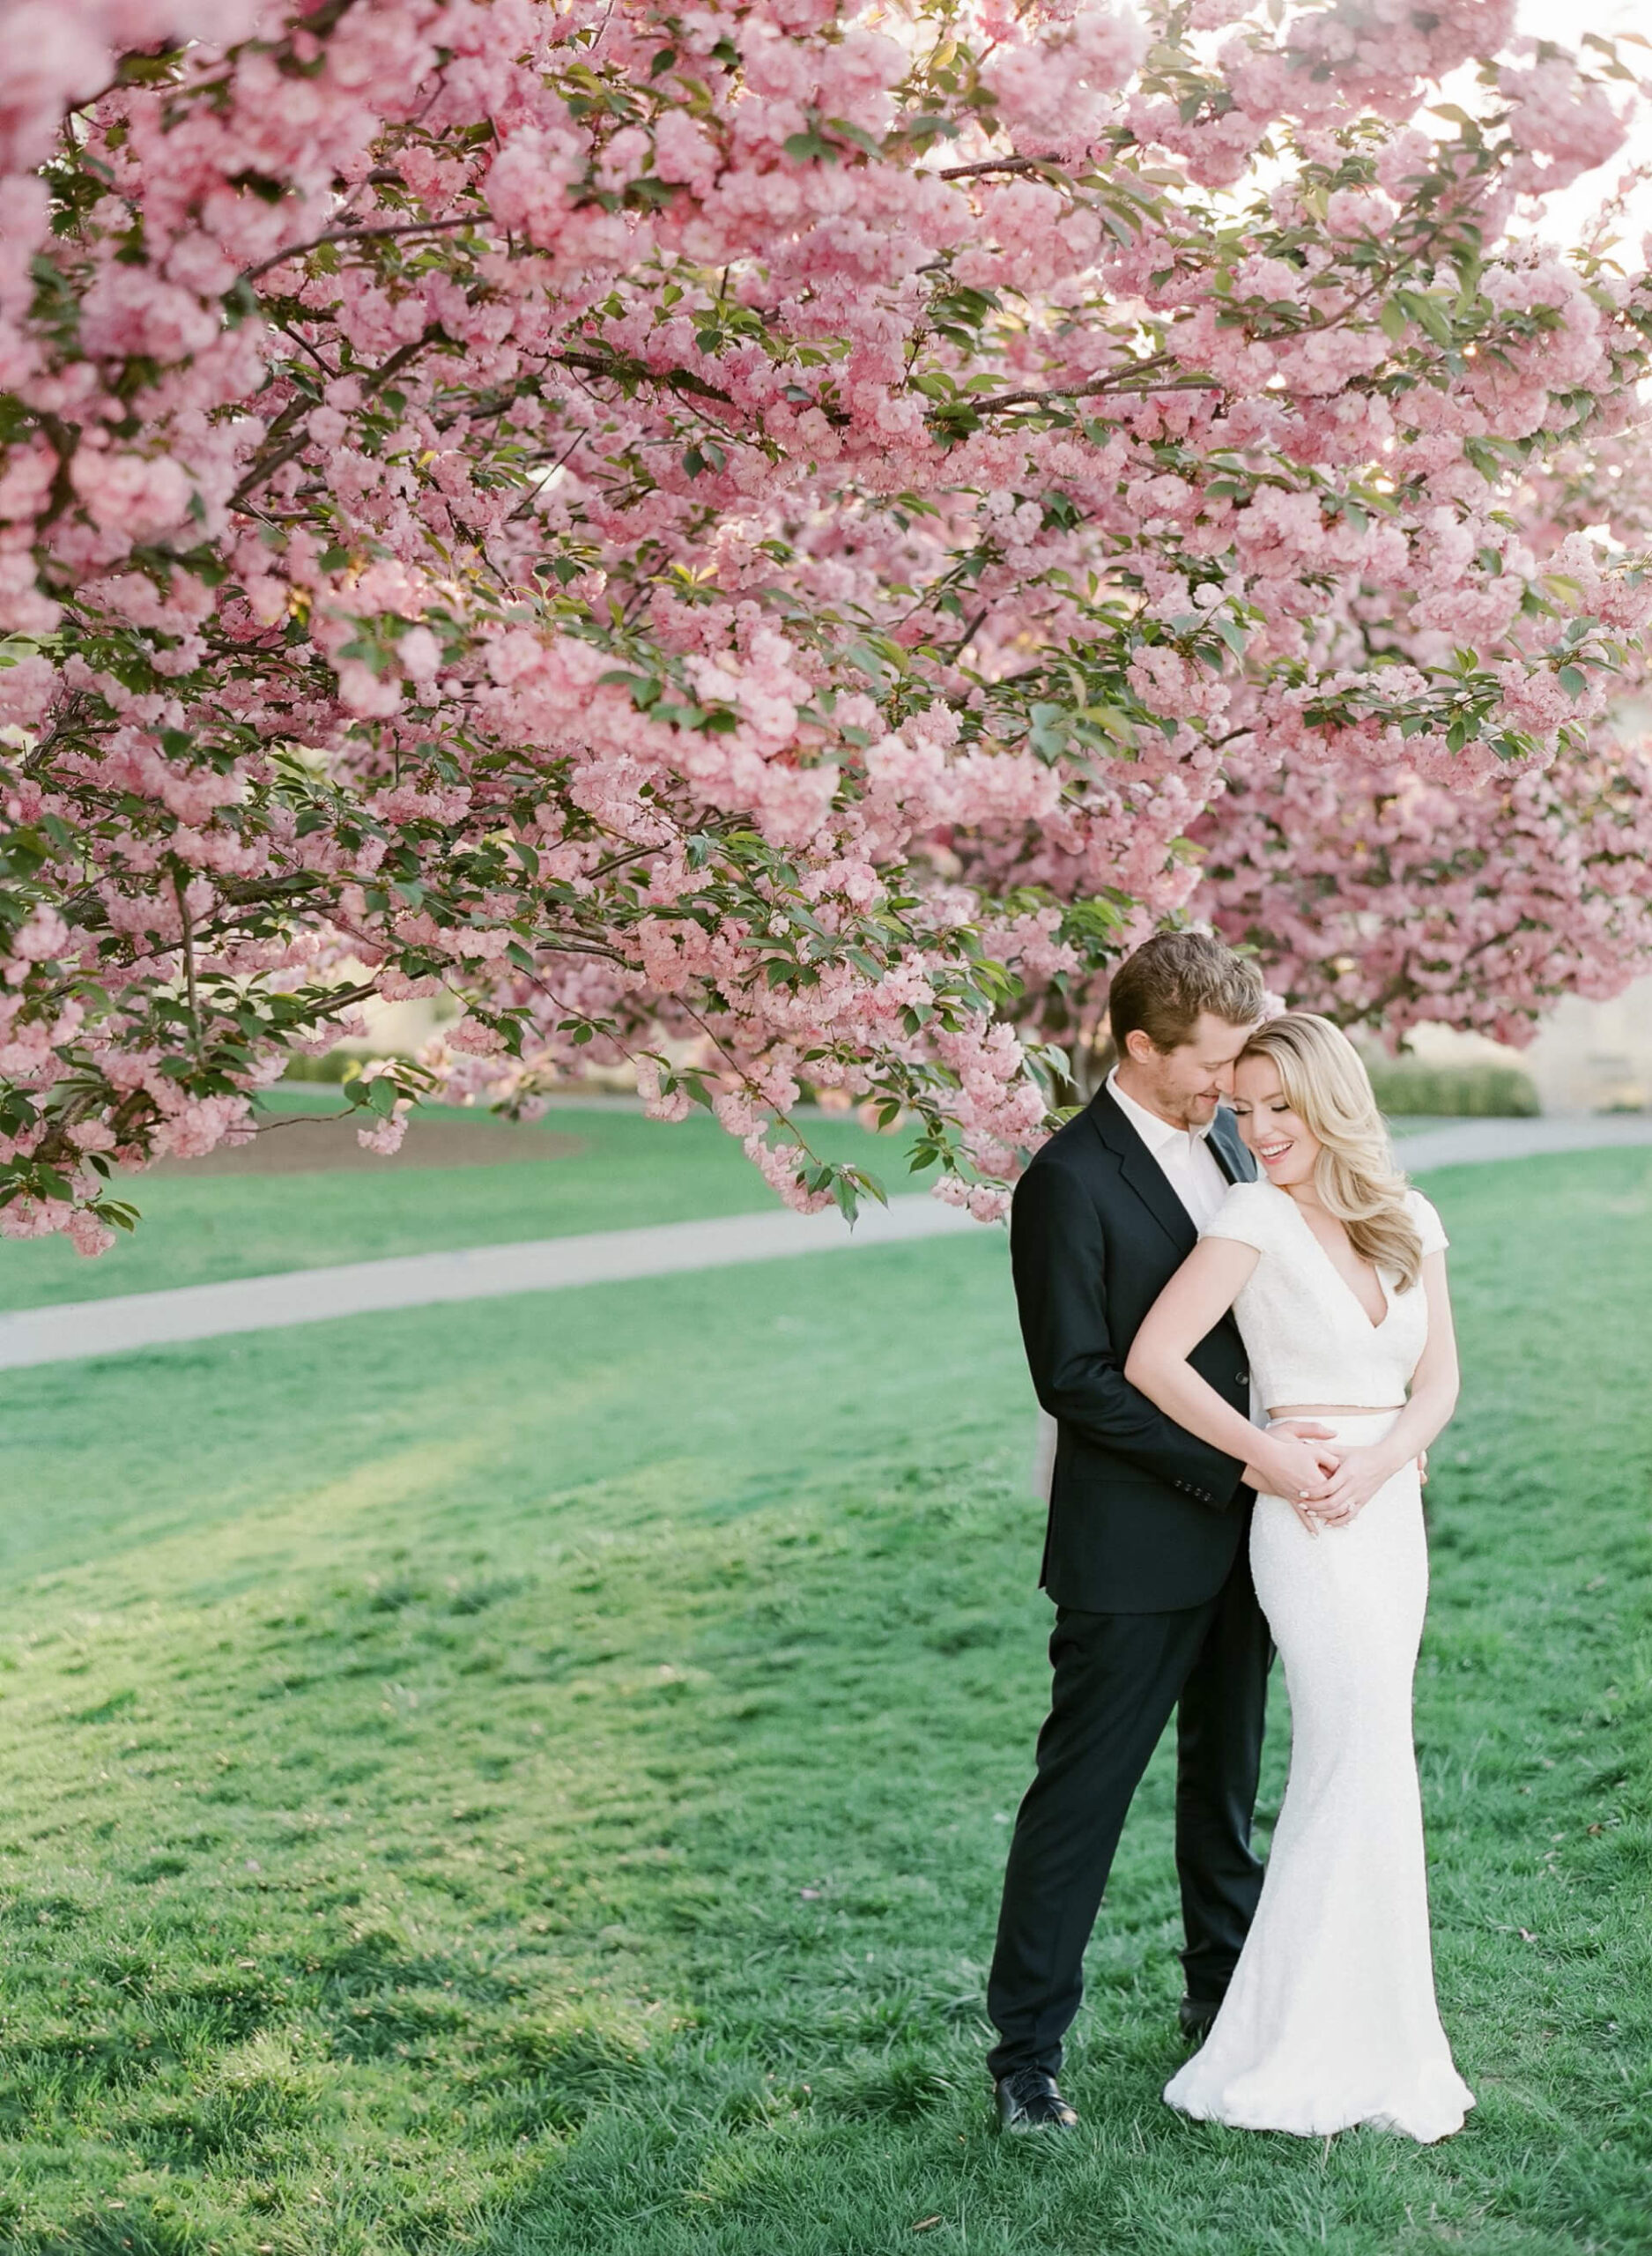 Couple under cherry blossom trees during engagement session at VMFA